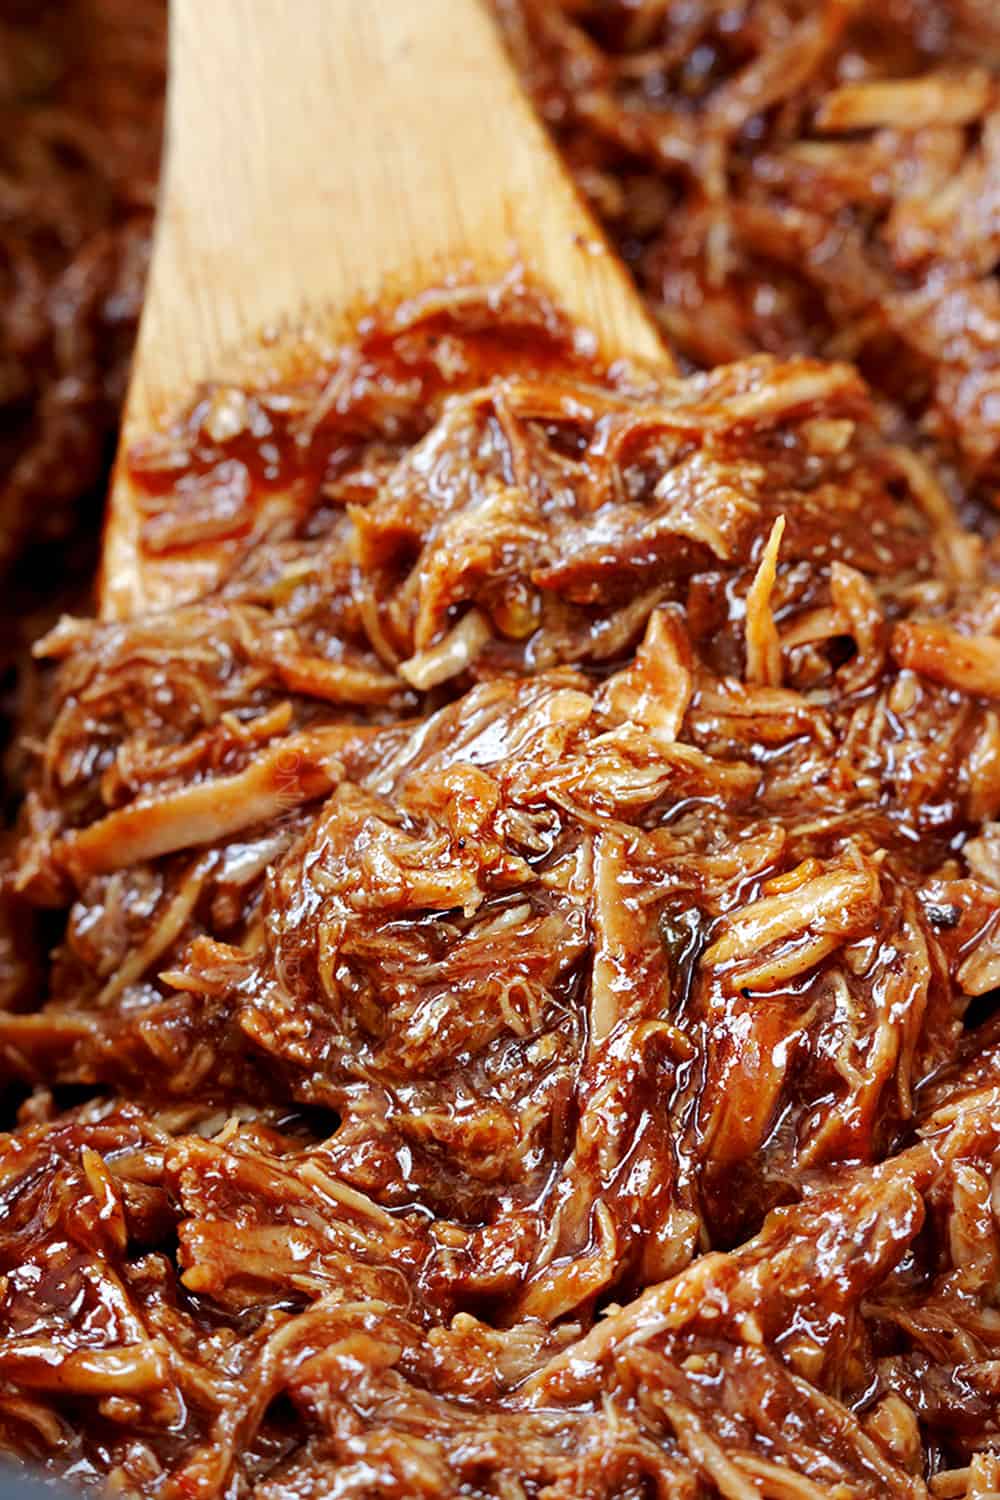 up close of making bbq pork for pulled pork sandwiches showing how saucy it is